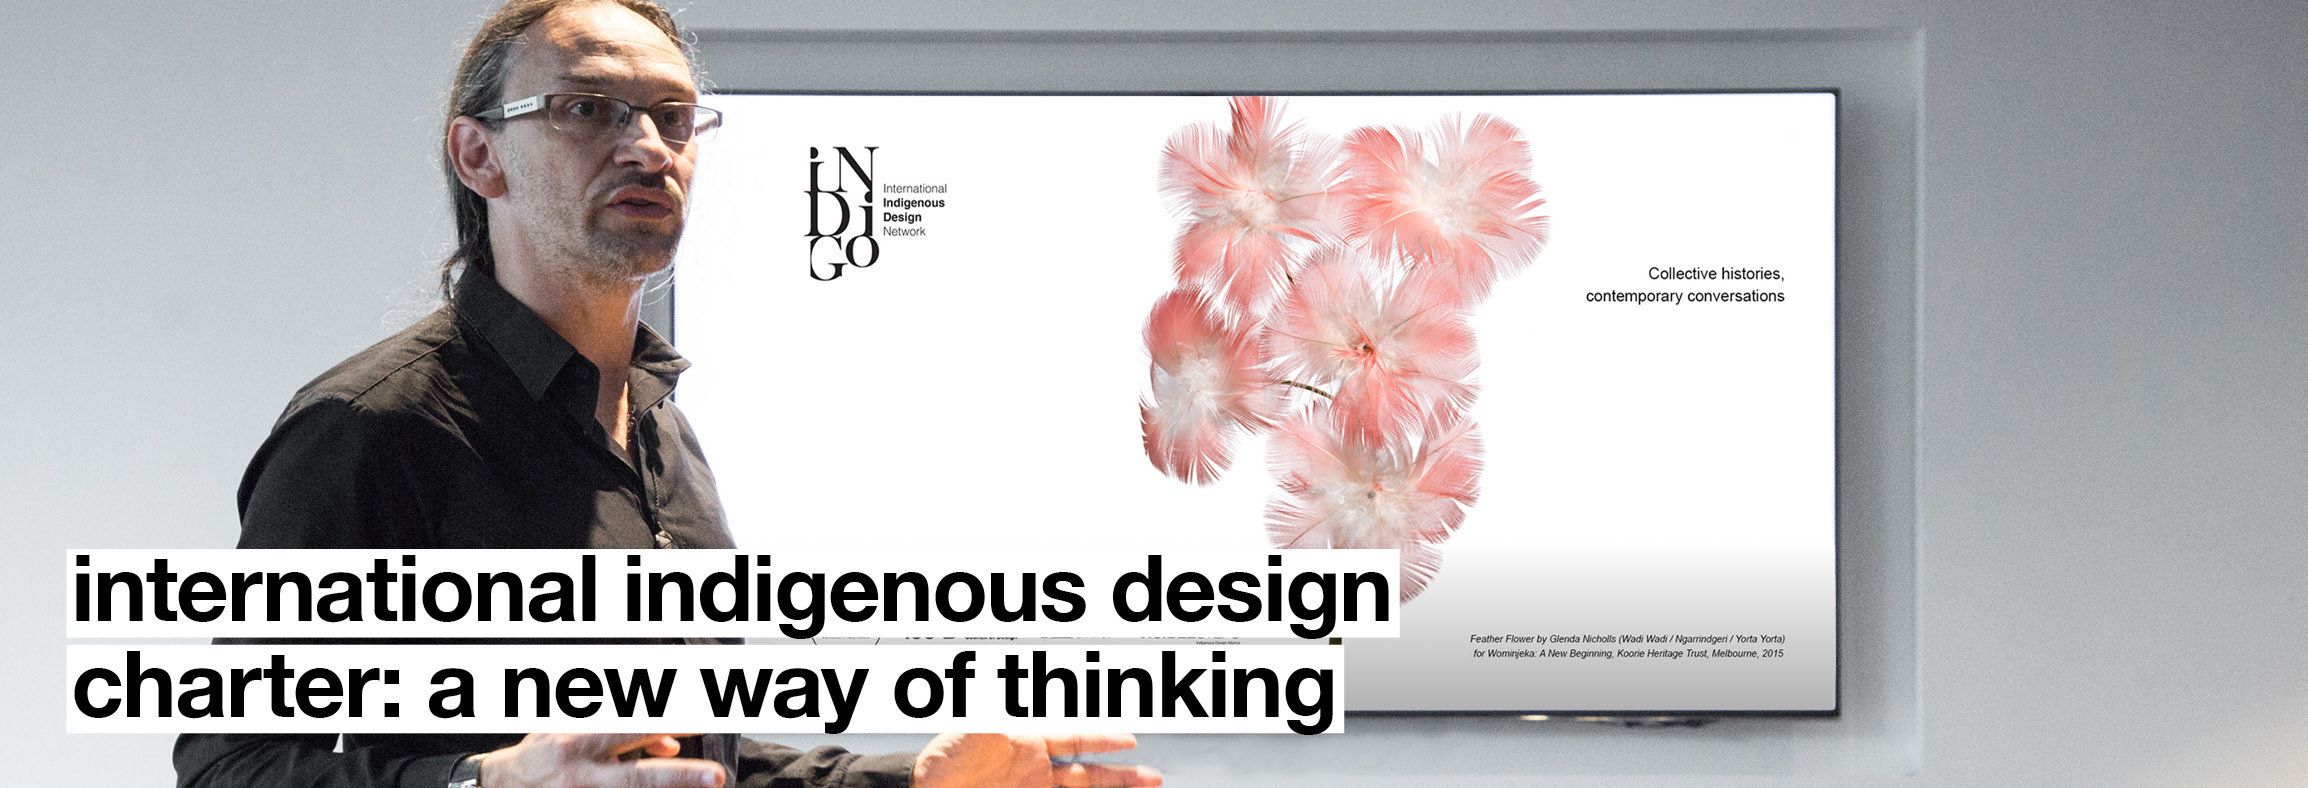 International Indigenous Design Charter: A New Way of Thinking